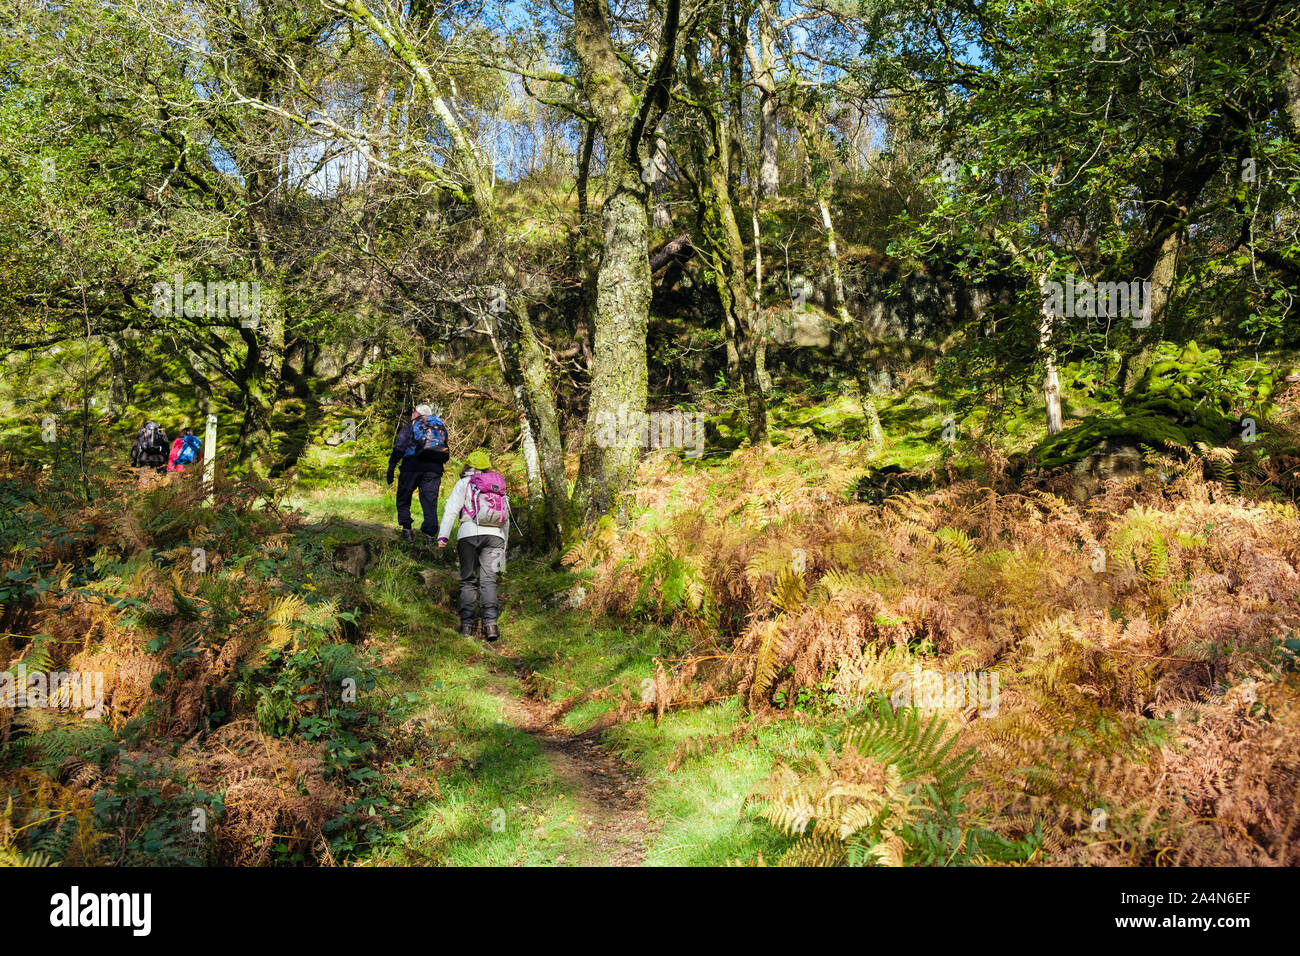 Coed Craflwyn woods with people walking on a woodland footpath through trees with dappled sunshine in Snowdonia National Park in autumn. Wales UK Stock Photo